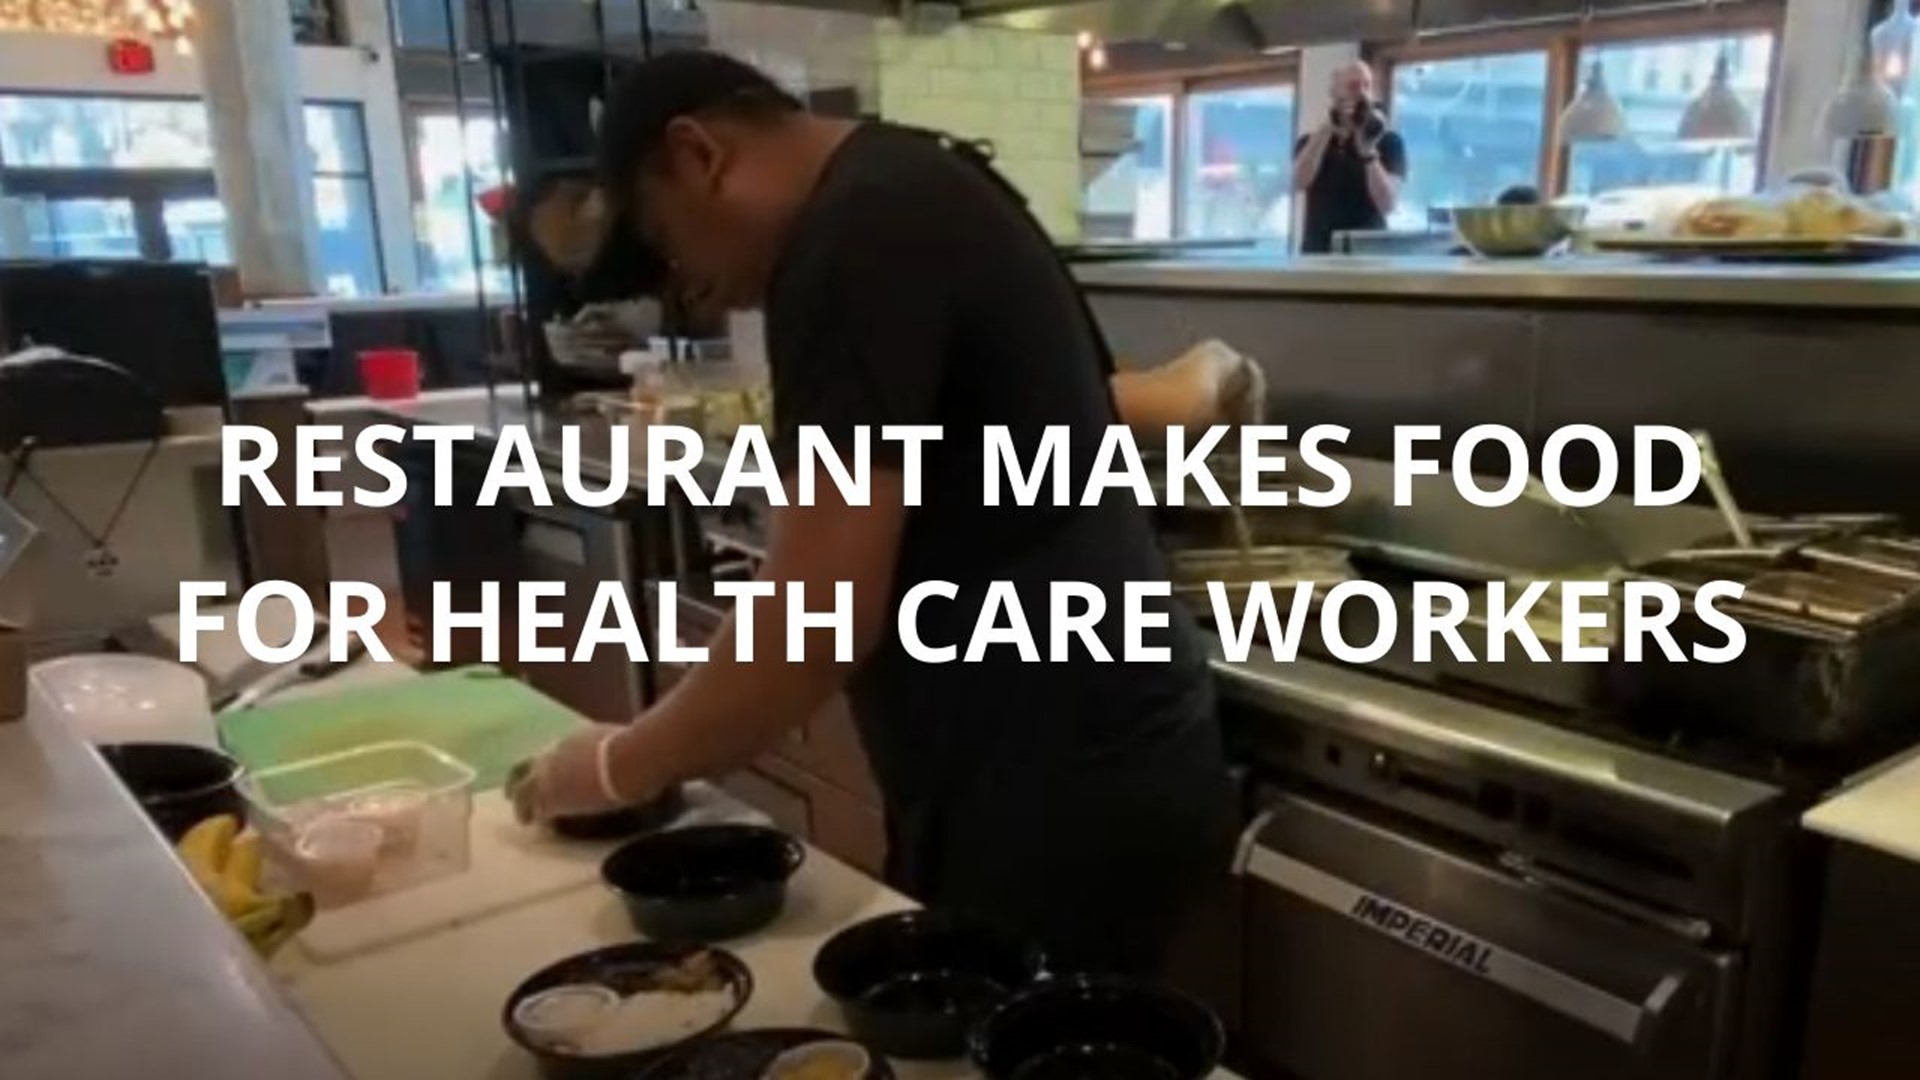 A local restaurant is making food for health care workers on the front lines.